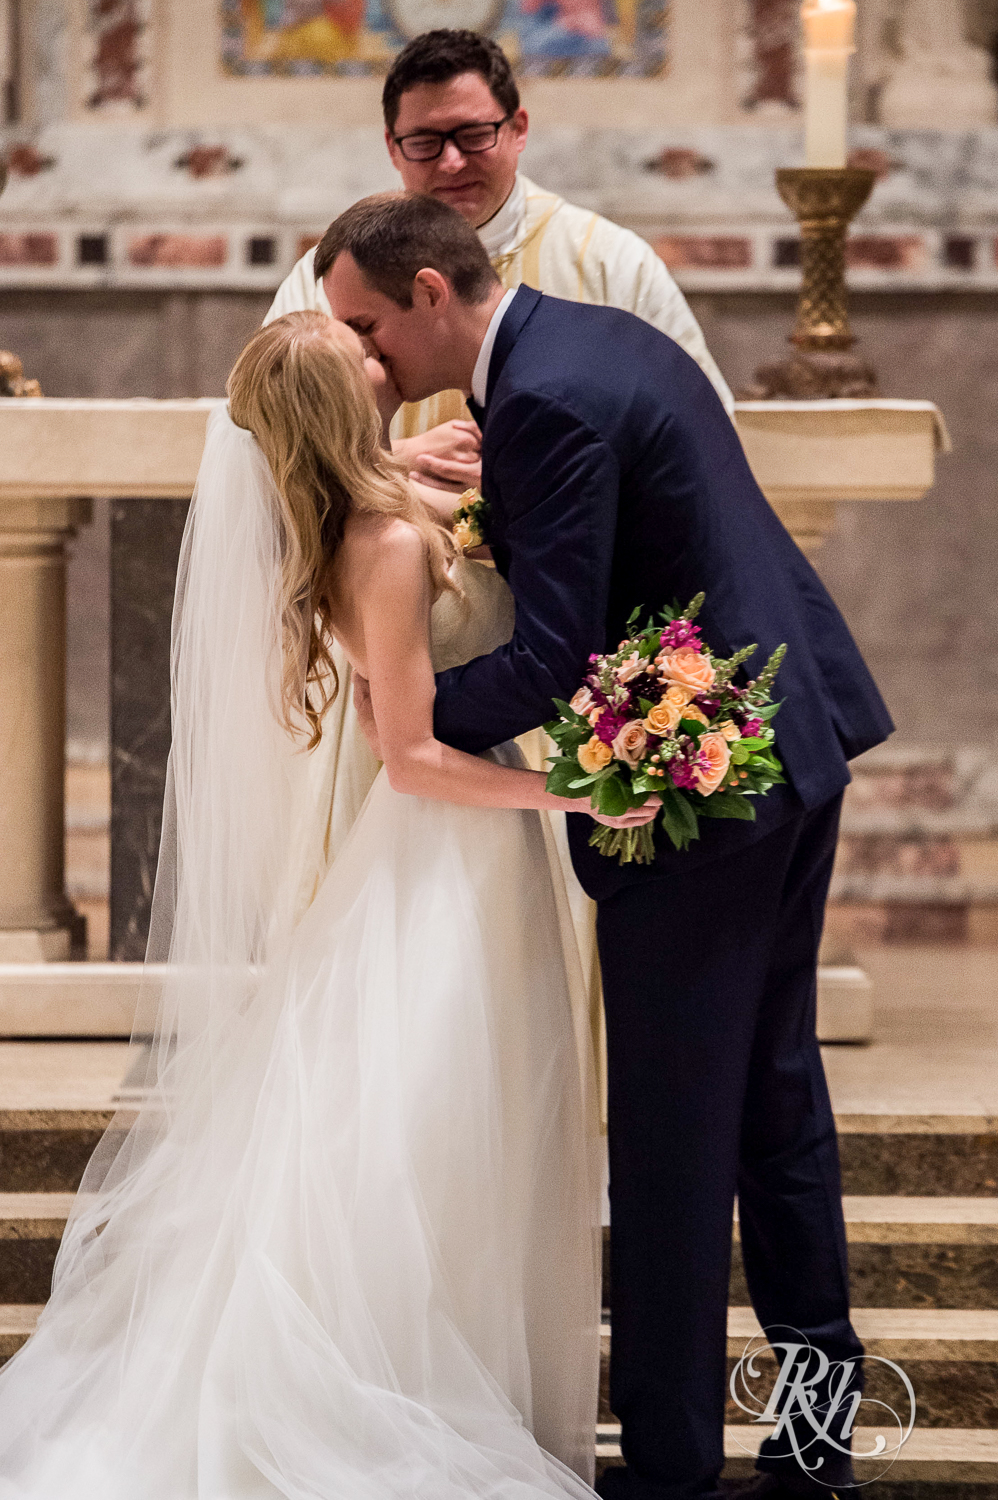 Bride and groom kiss during wedding ceremony at St. Thomas Moore Catholic Church in Saint Paul, Minnesota.